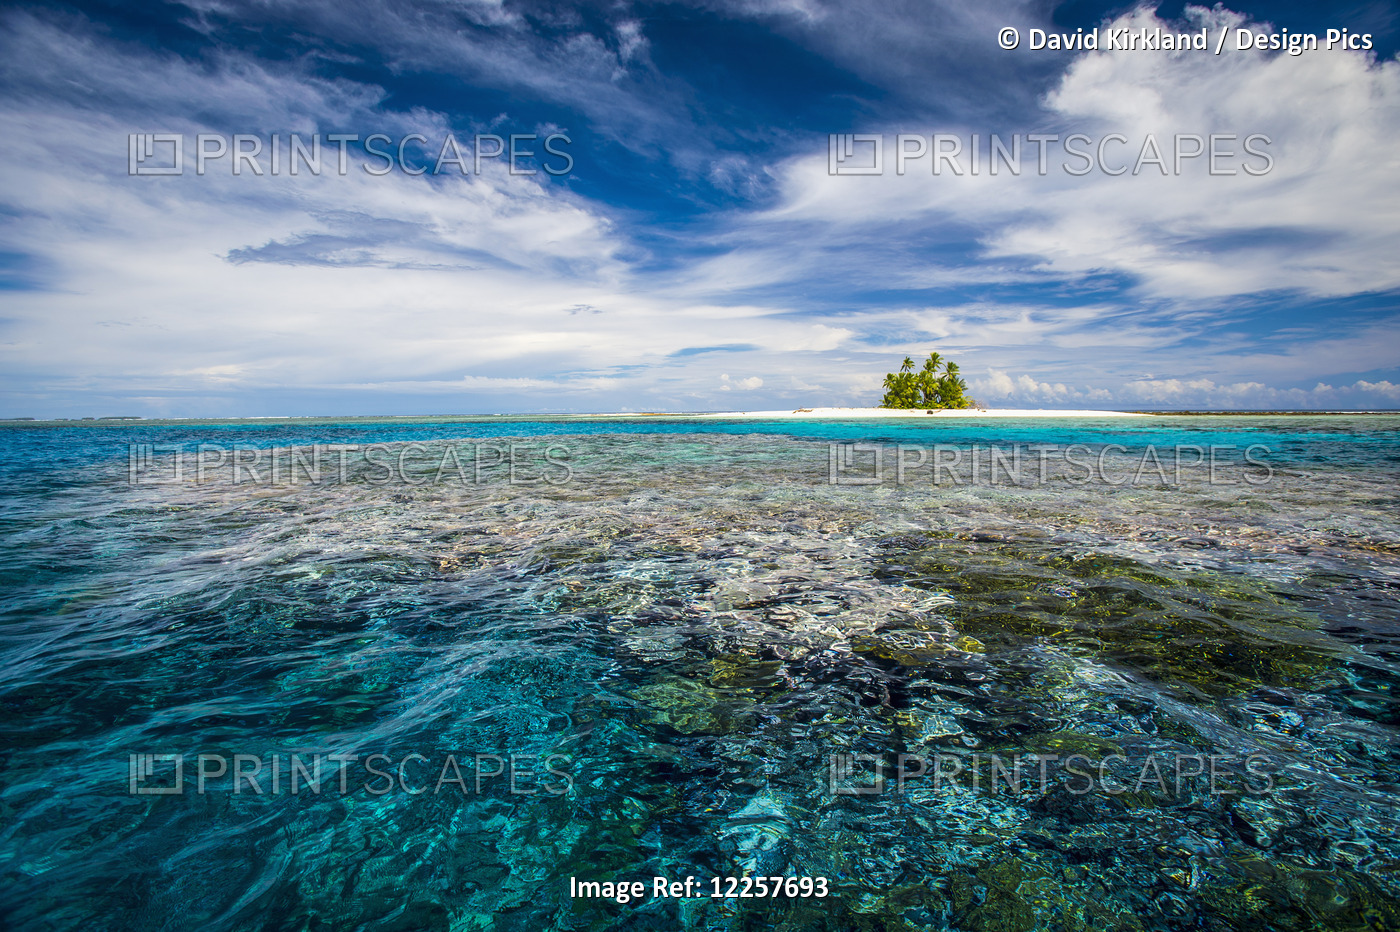 An Island That Forms Part Of The Marine Park, Near The Tuvalu Mainland; Tuvalu